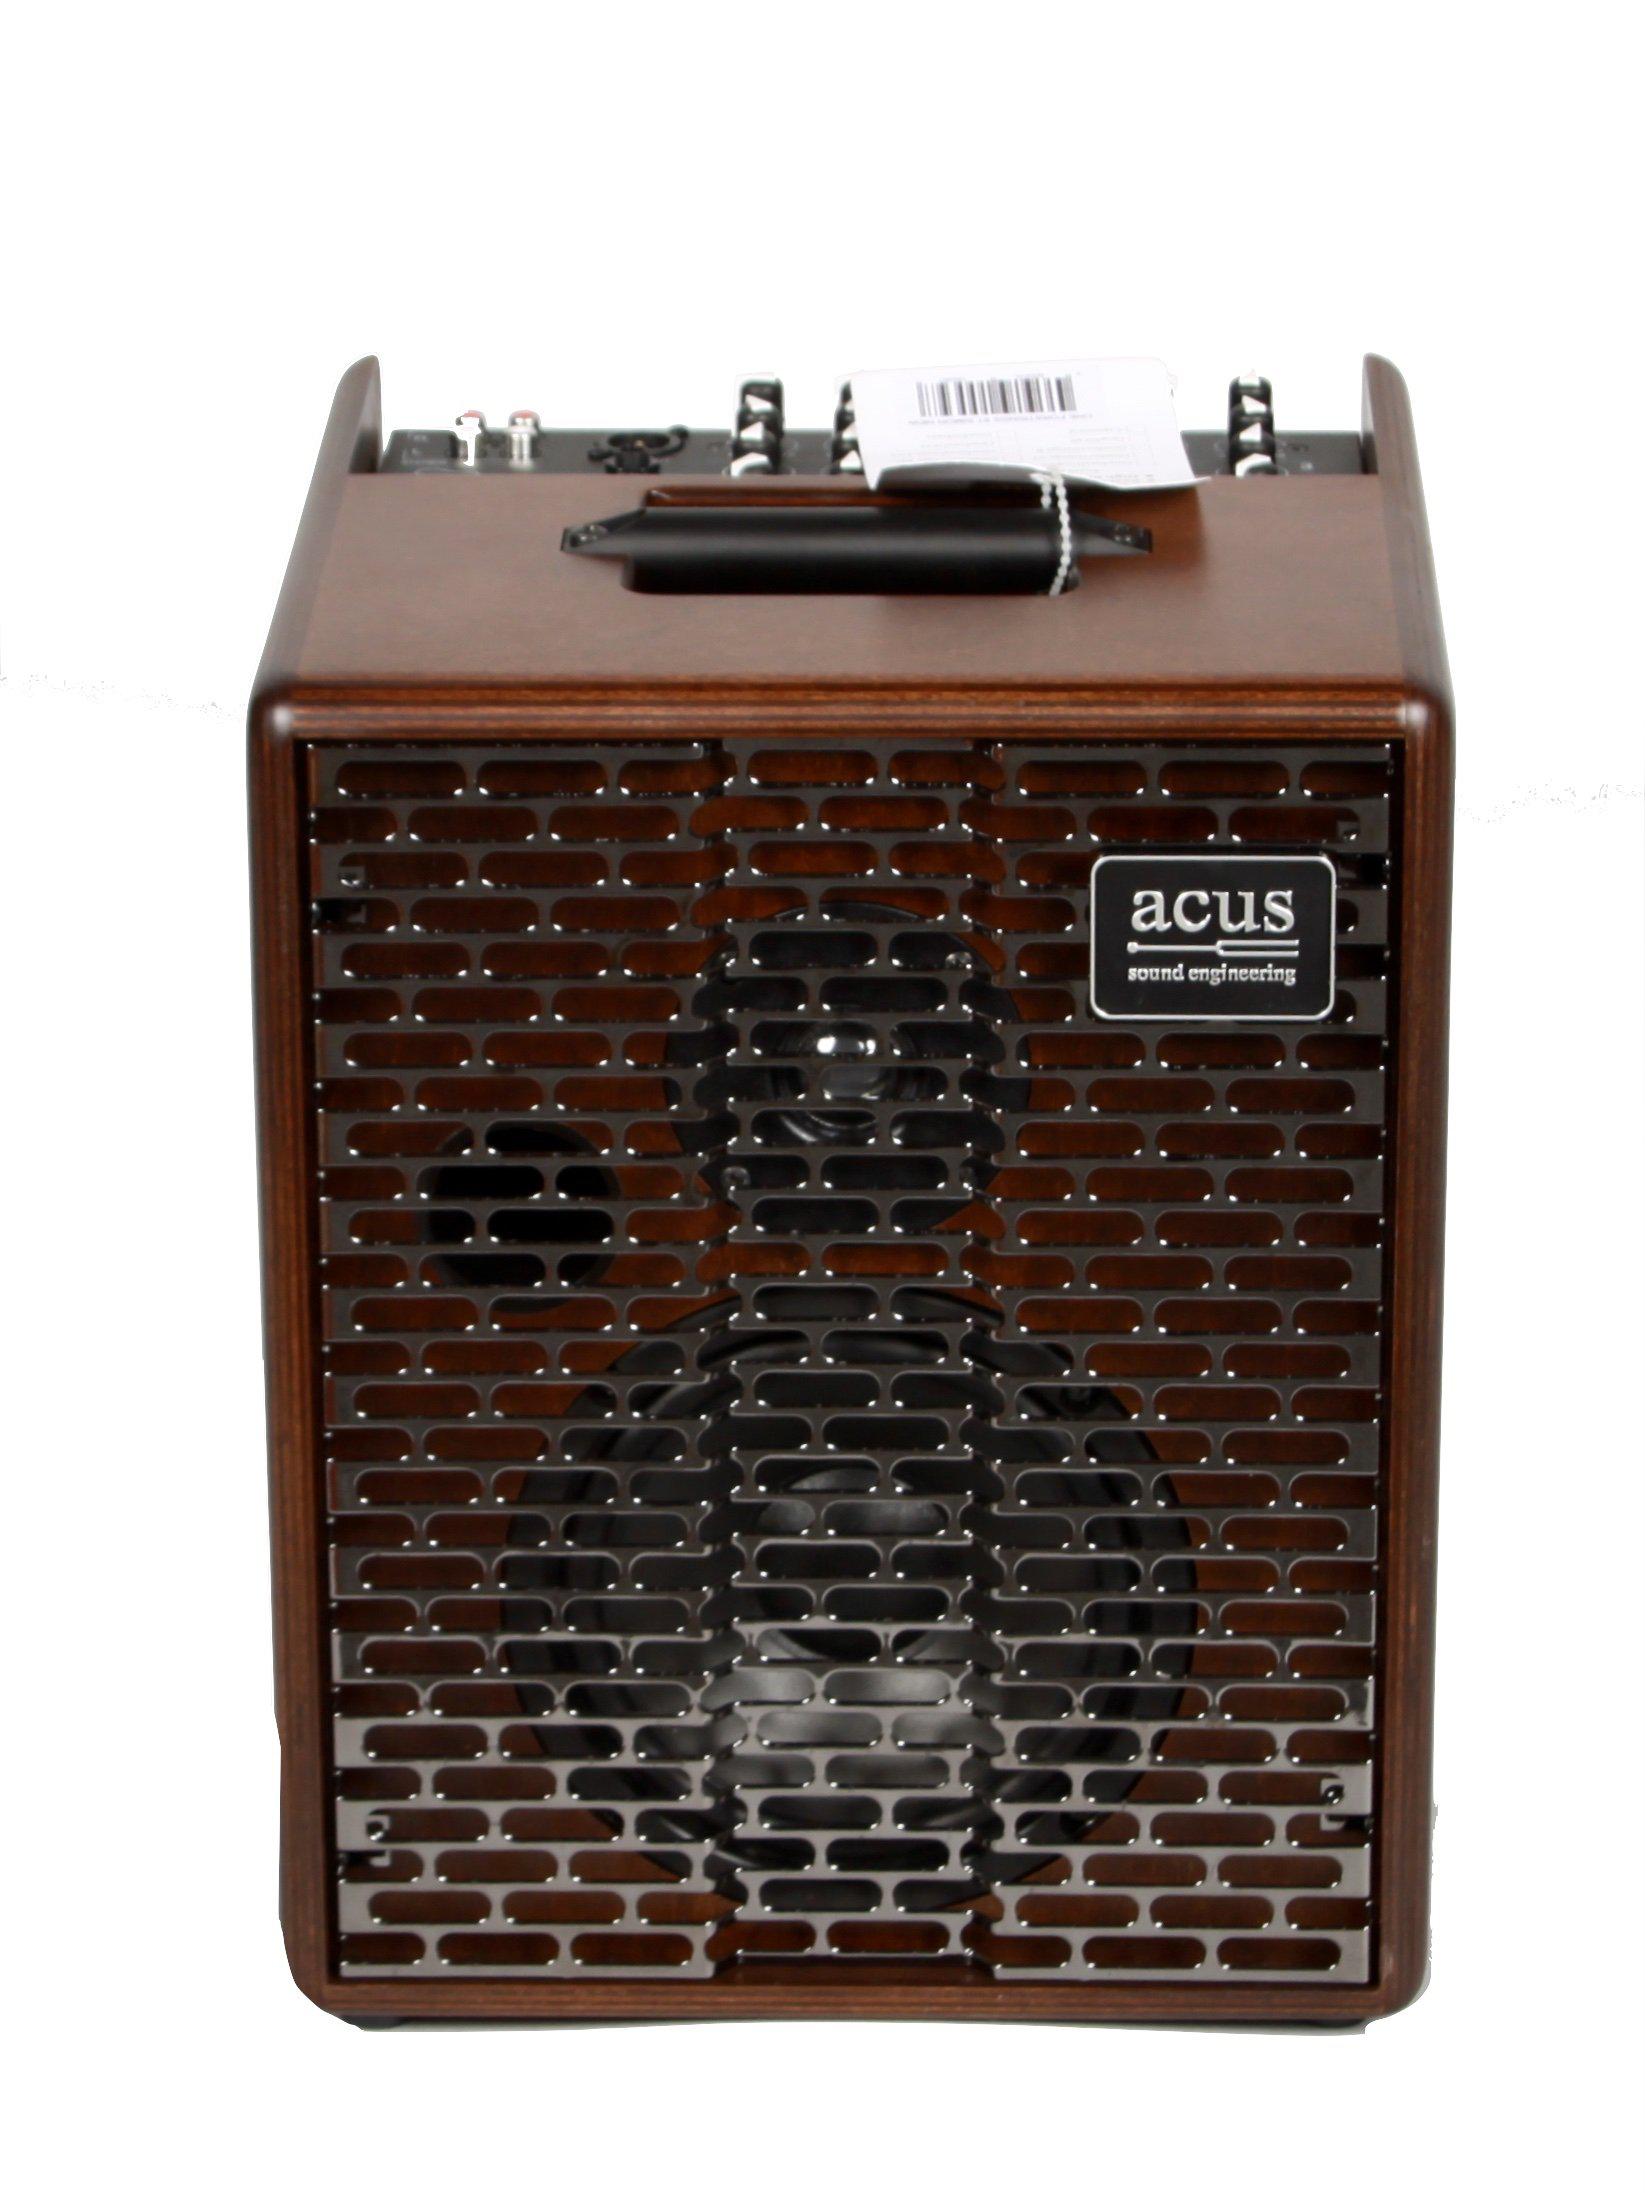 Acus Sound Engineering Acoustic Amp 6T - Heartbreaker Guitars - Heartbreaker Guitars